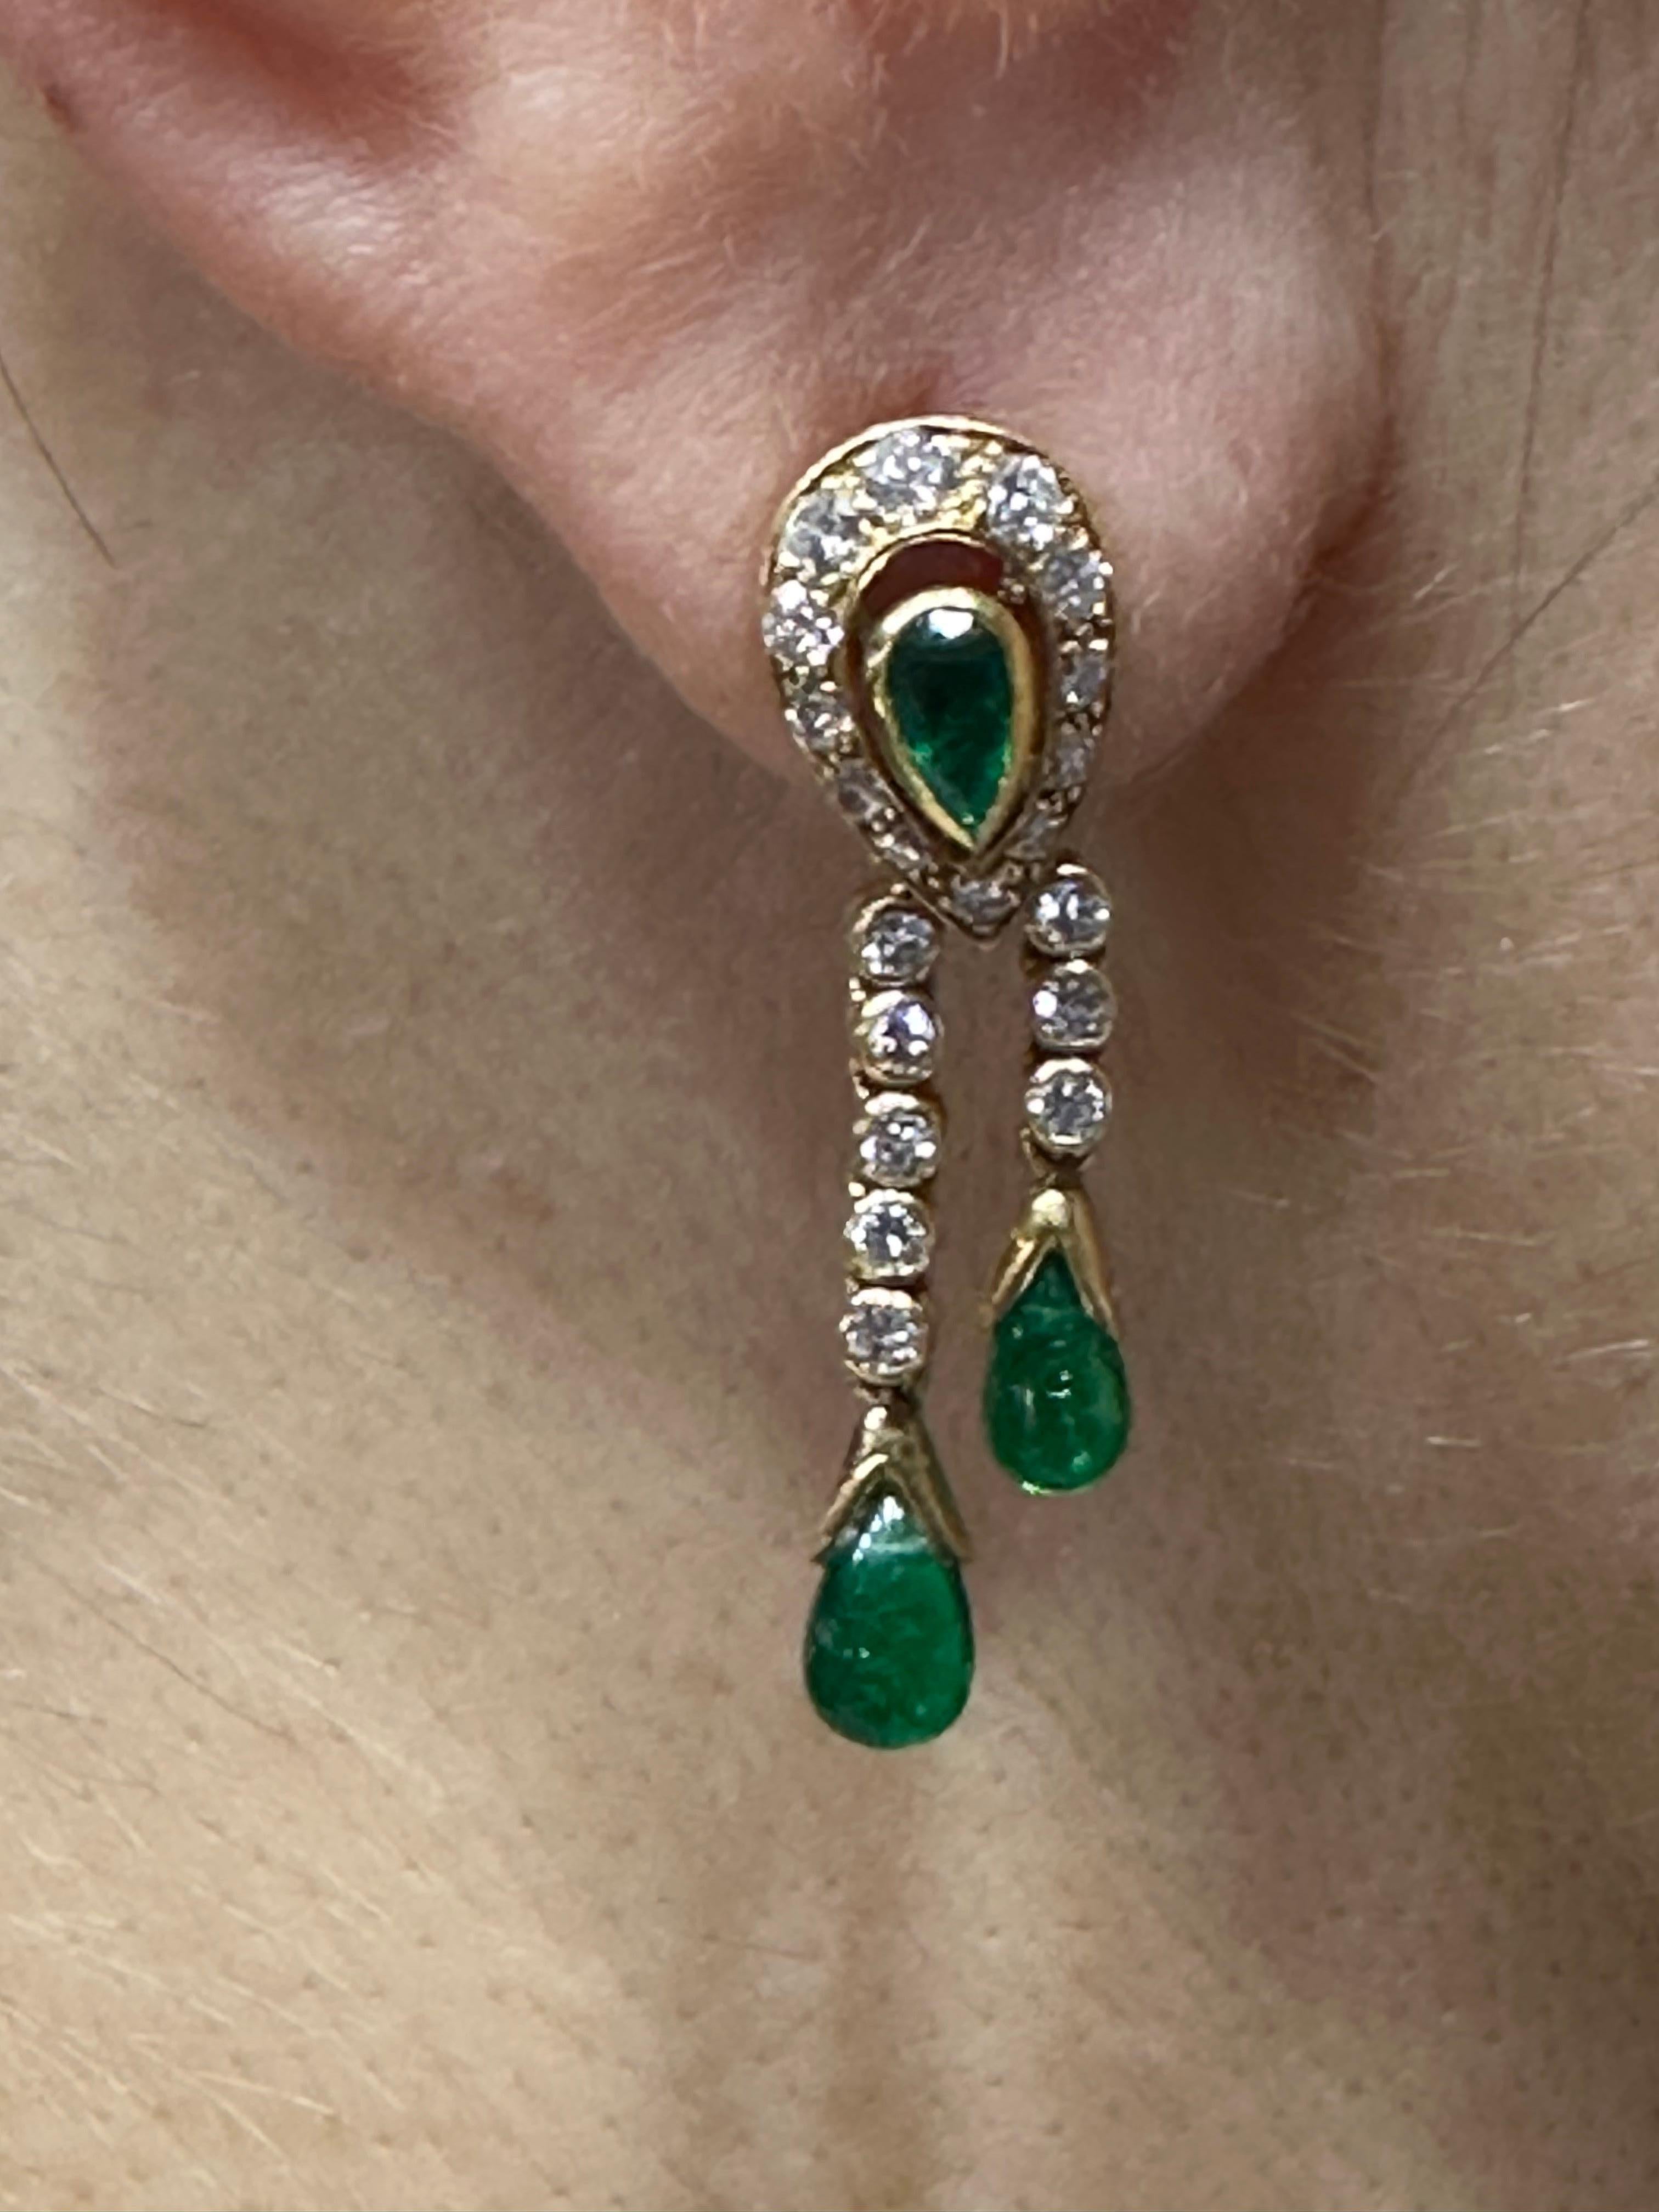 This charming pair of diamond and emerald Cartier earrings dates back to 1970s and were made by Cartier, Paris. The emeralds are Colombian and have a beautiful colour. Although not large in size, the quality of the stones and the superior